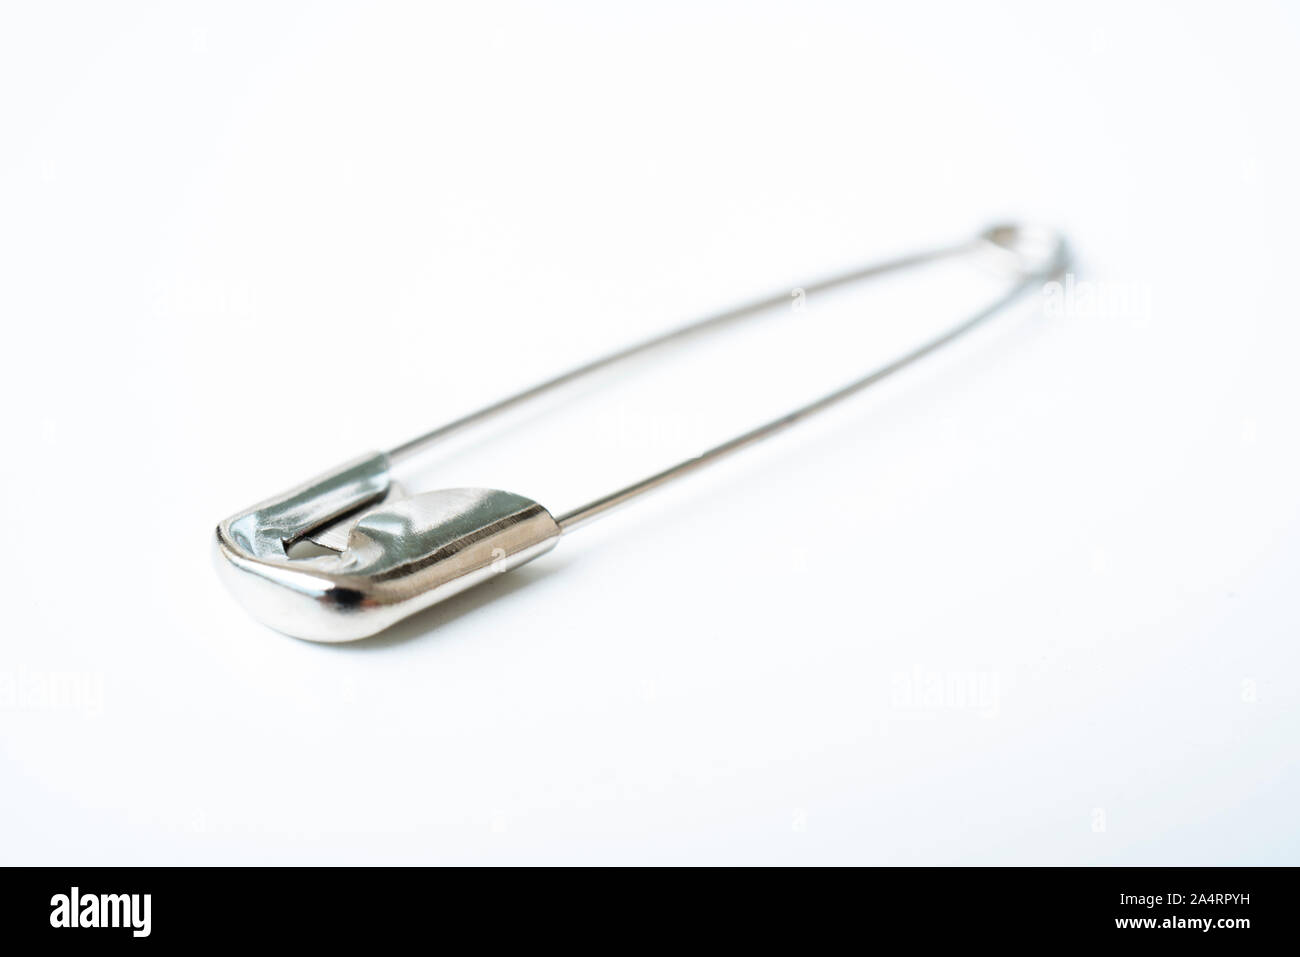 https://c8.alamy.com/comp/2A4RPYH/macro-metall-safety-pin-for-crafts-fashion-jewelry-hobby-or-household-on-white-background-with-selective-focus-2A4RPYH.jpg